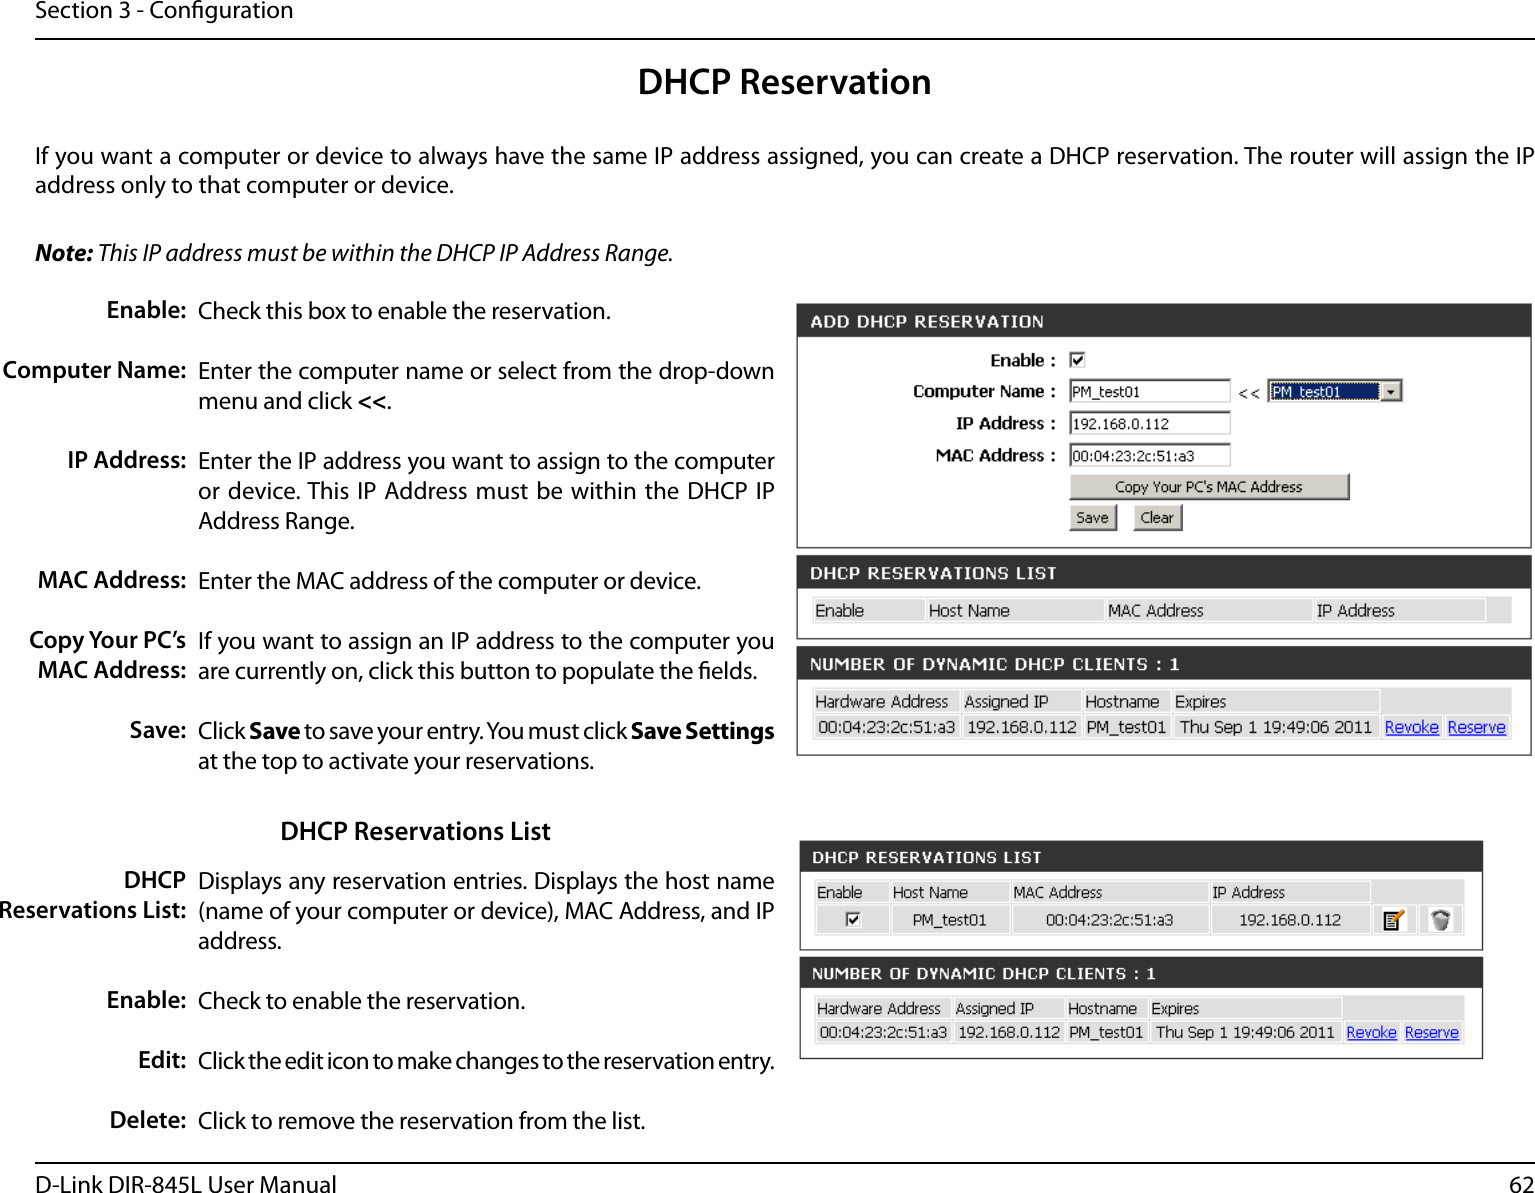 62D-Link DIR-845L User ManualSection 3 - CongurationDHCP ReservationIf you want a computer or device to always have the same IP address assigned, you can create a DHCP reservation. The router will assign the IP address only to that computer or device. Note: This IP address must be within the DHCP IP Address Range.Check this box to enable the reservation.Enter the computer name or select from the drop-down menu and click &lt;&lt;.Enter the IP address you want to assign to the computer or device. This IP Address must  be within the DHCP IP Address Range.Enter the MAC address of the computer or device.If you want to assign an IP address to the computer you are currently on, click this button to populate the elds. Click Save to save your entry. You must click Save Settings at the top to activate your reservations. Displays any reservation entries. Displays the host name (name of your computer or device), MAC Address, and IP address.Check to enable the reservation.Click the edit icon to make changes to the reservation entry.Click to remove the reservation from the list.Enable:Computer Name:IP Address:MAC Address:Copy Your PC’s MAC Address:Save:DHCP Reservations List:Enable:Edit:Delete:DHCP Reservations List